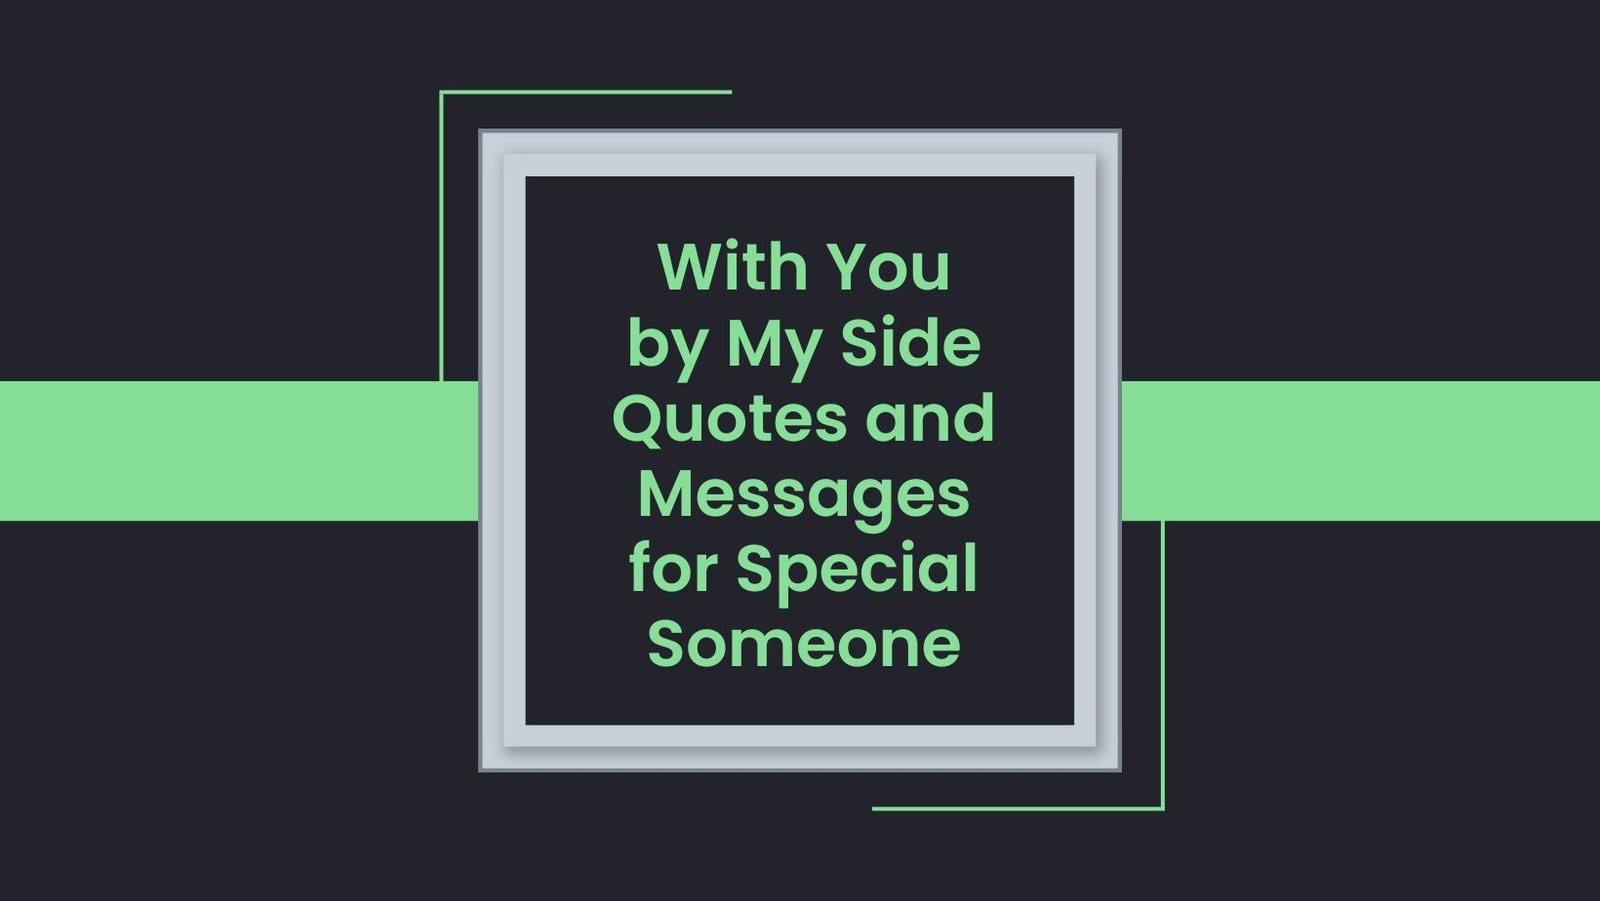 With You by My Side Quotes and Messages for Special Someone